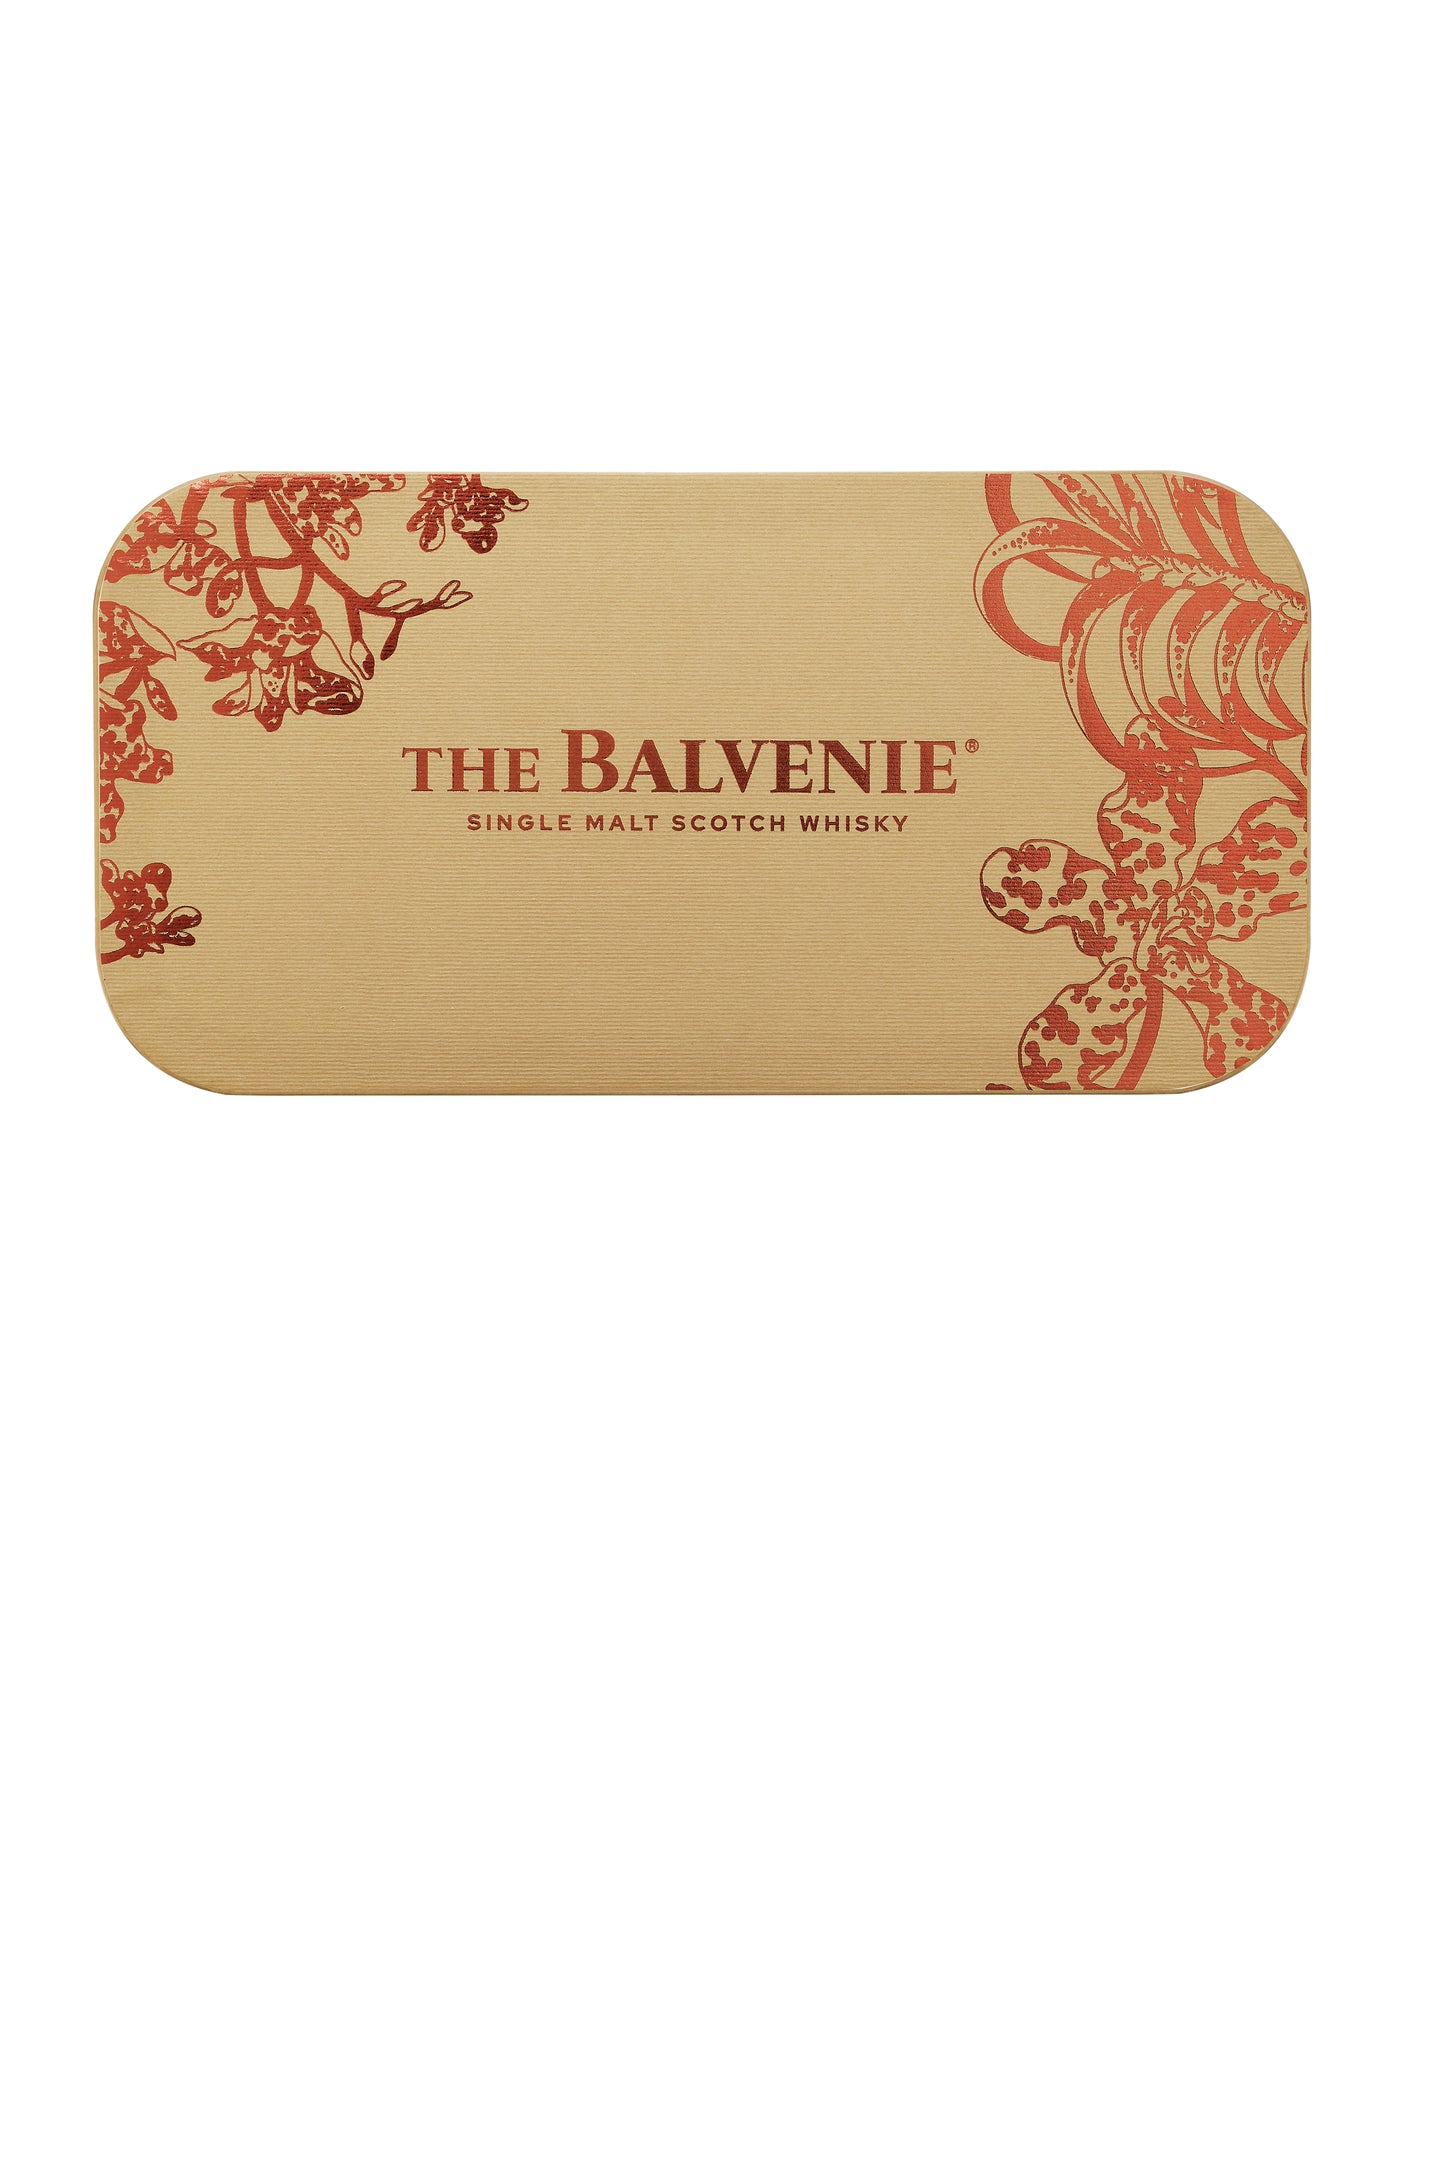 The Balvenie 14 Year Old Makers Pack